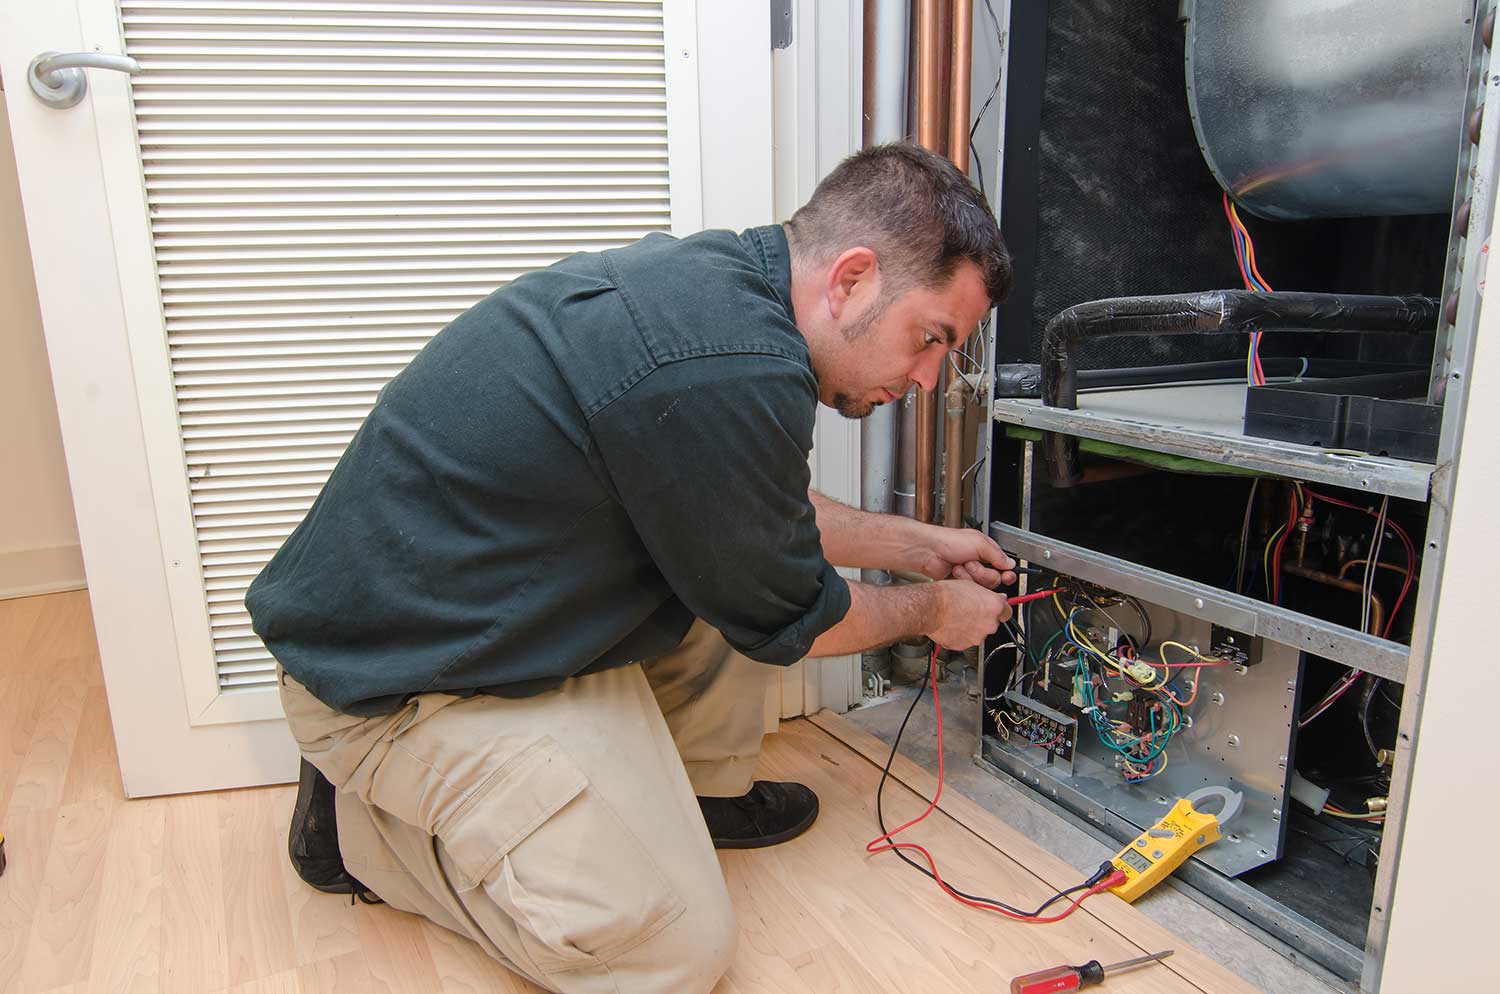 Using a heat pump to really switch from heating to cooling